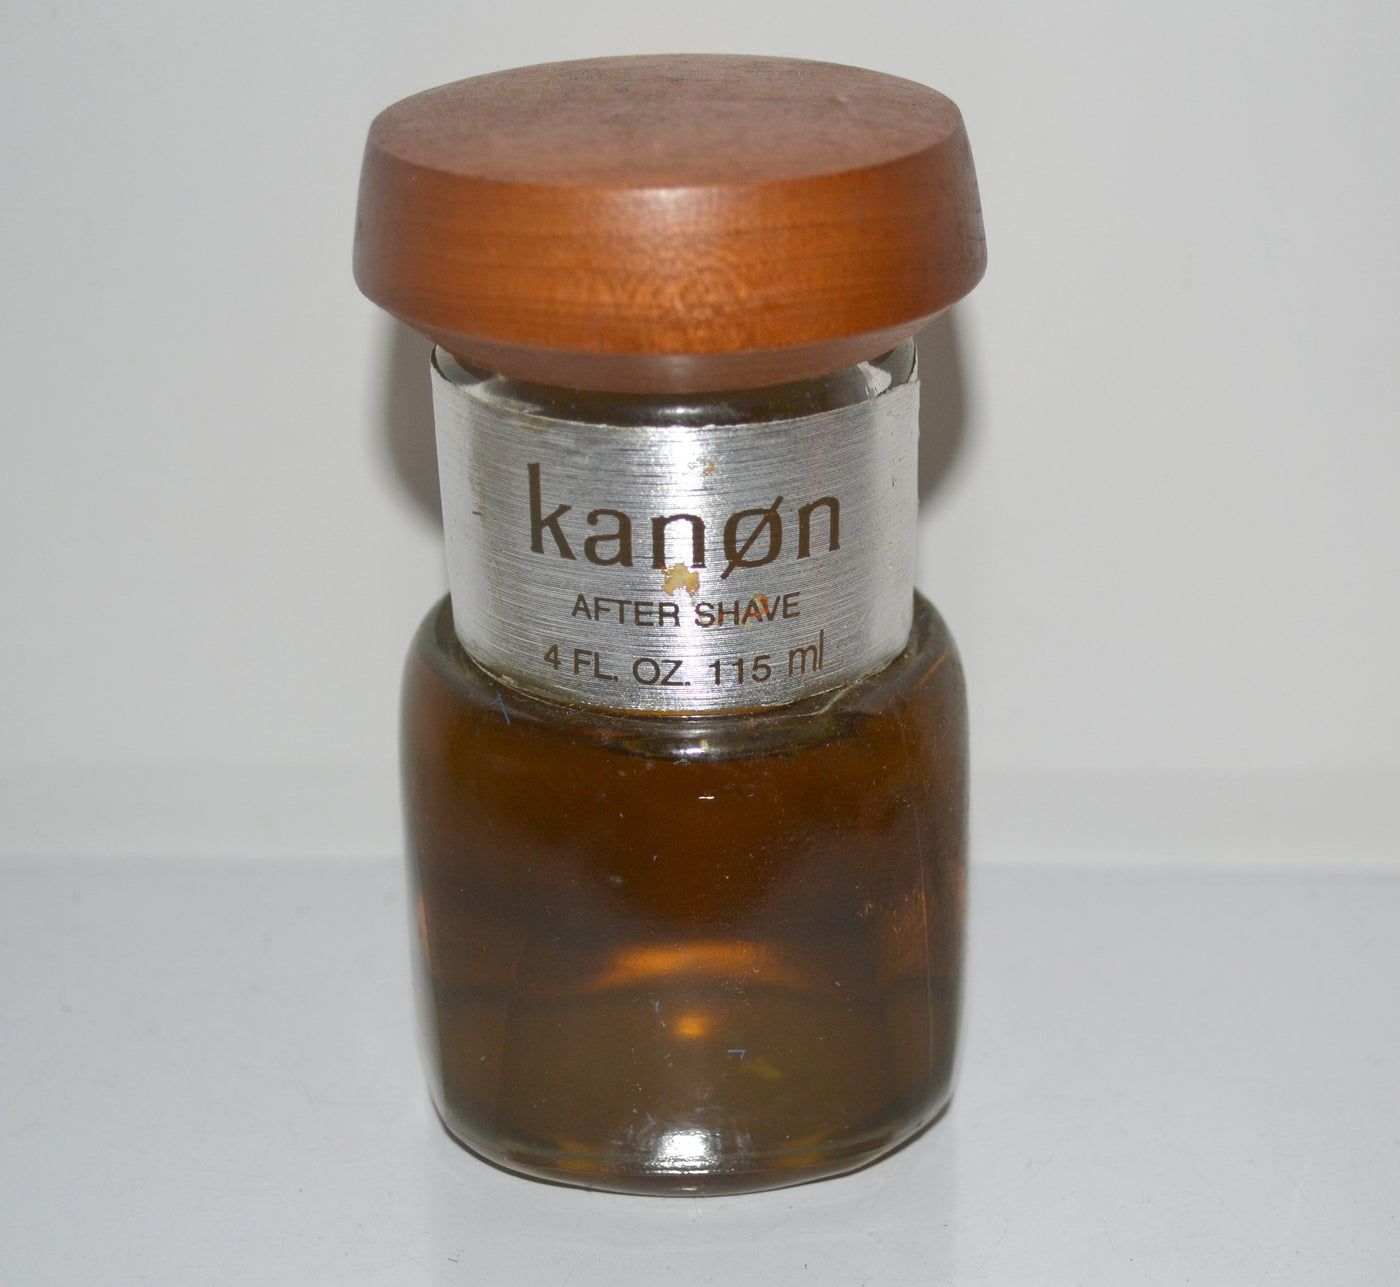 Kanon Aftershave